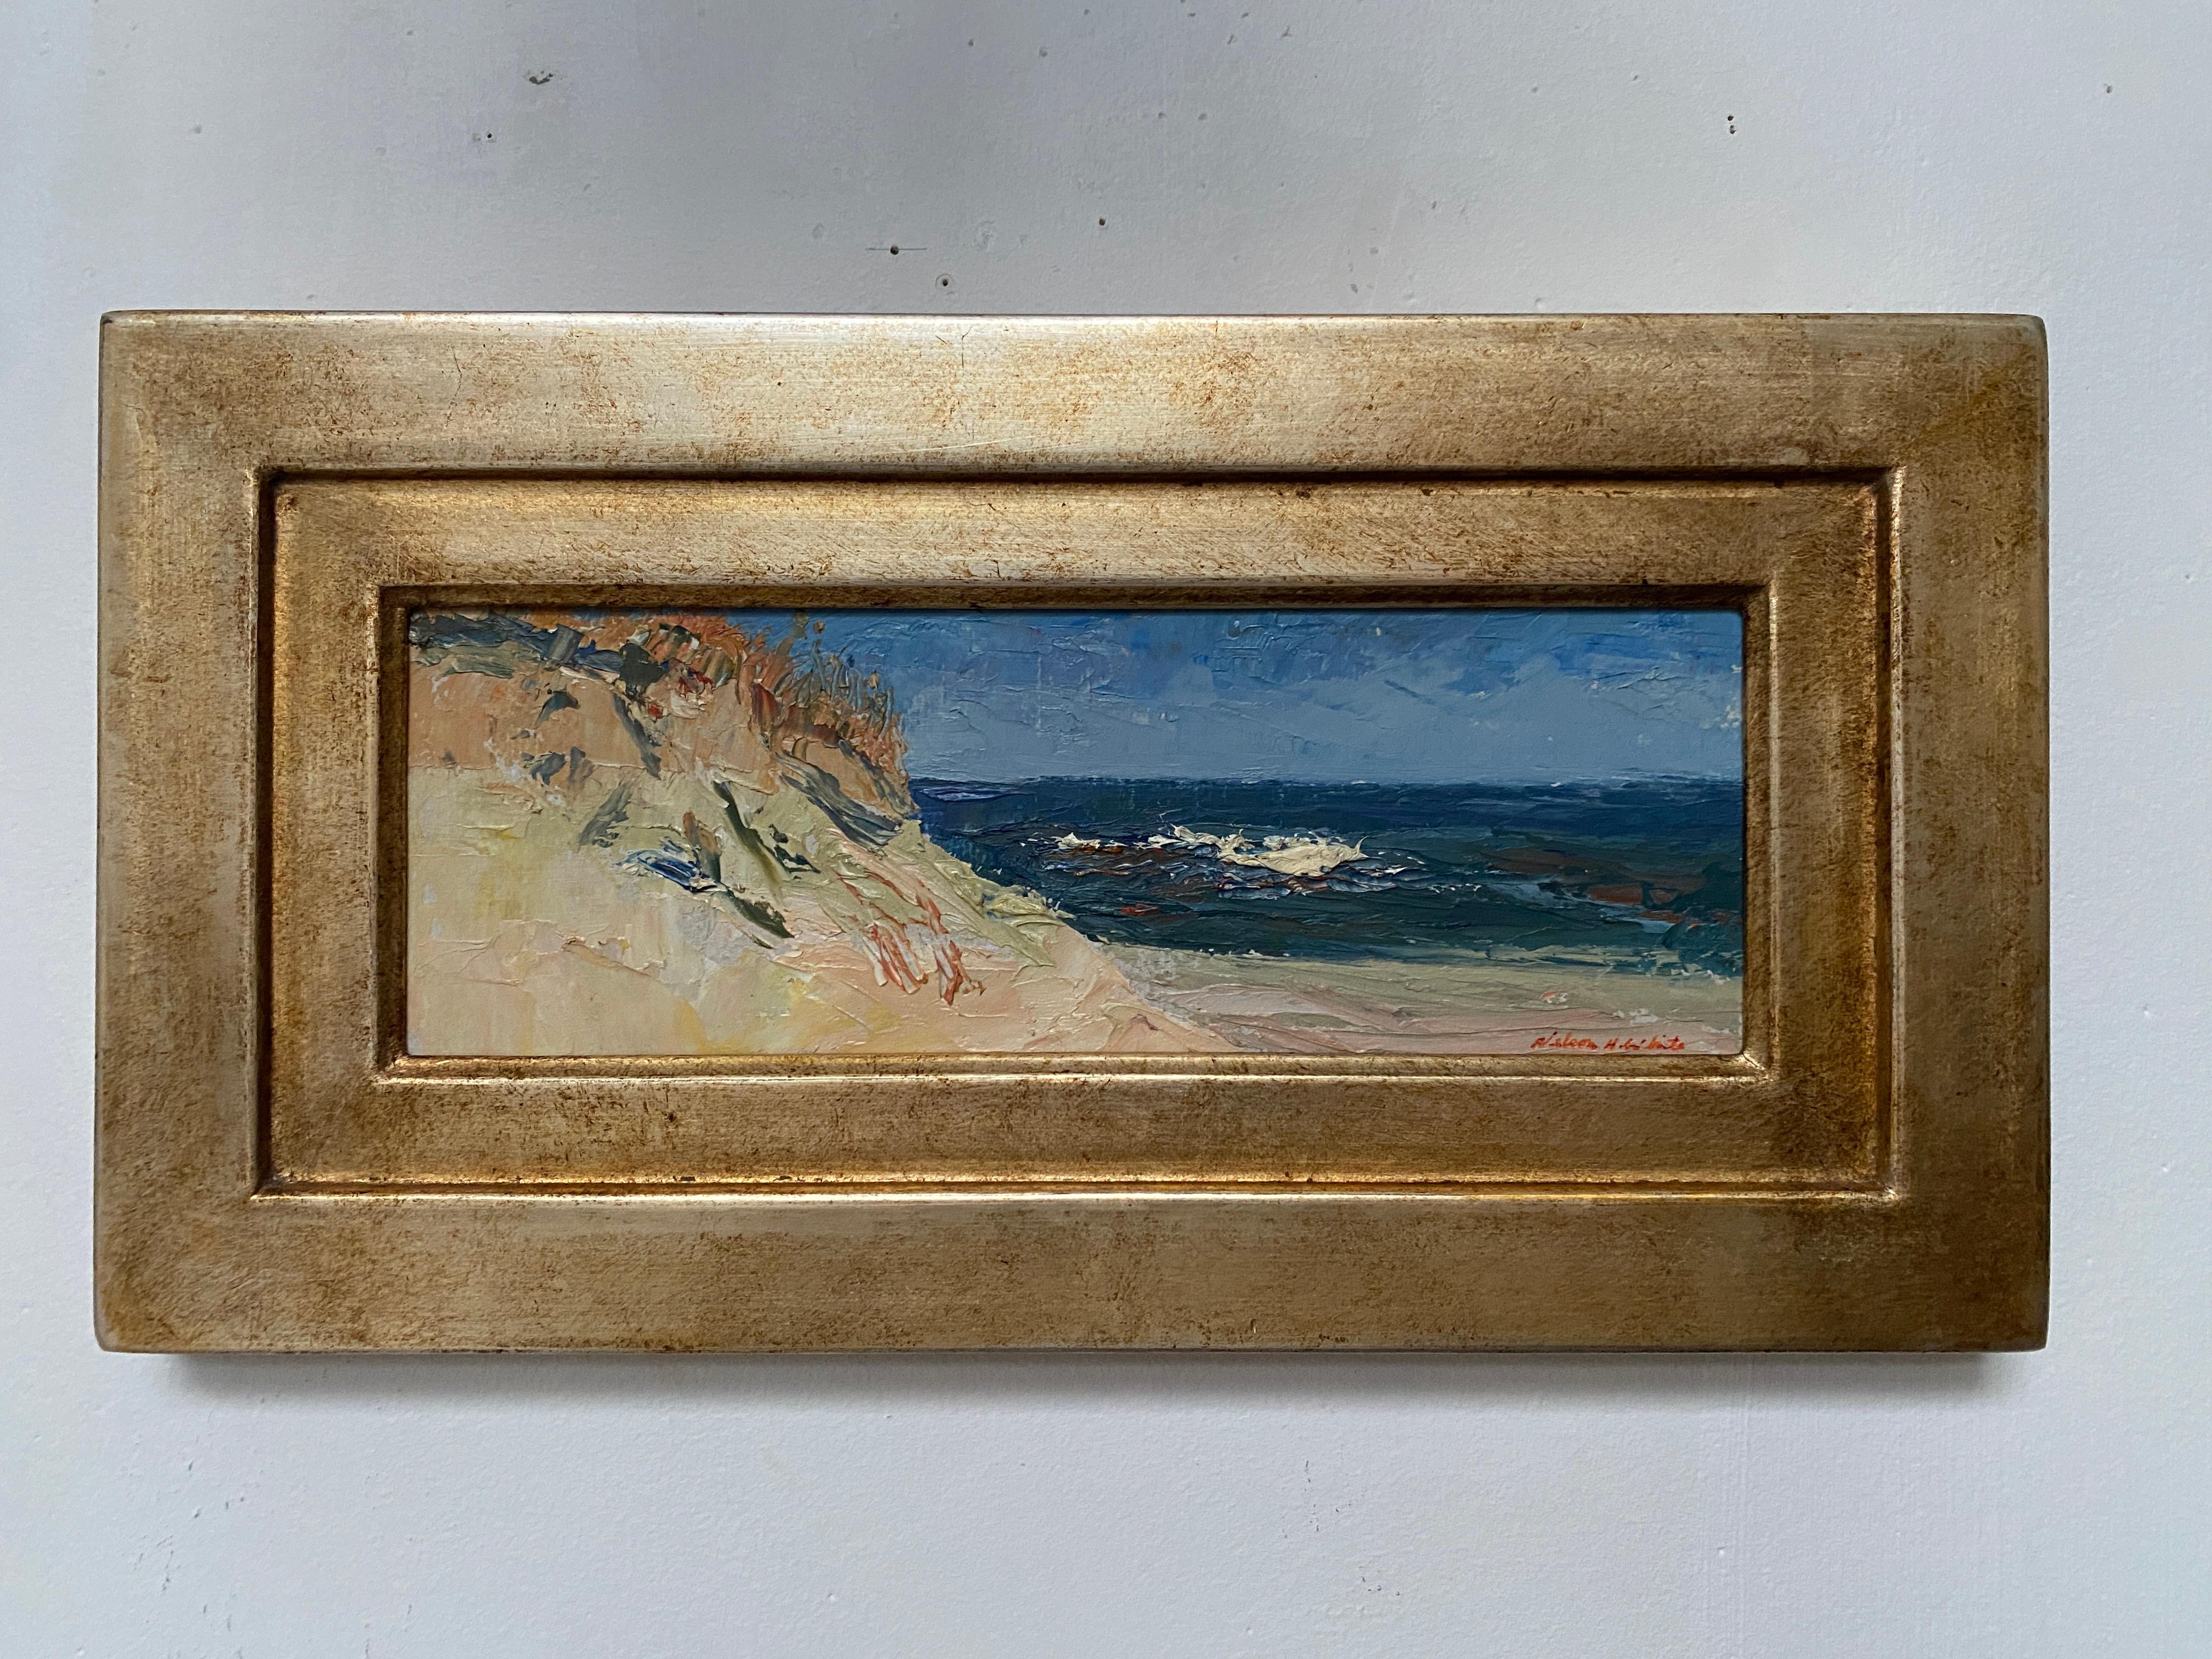 A blue sky sets the tone of the scene, as it often does in Nelson White's paintings. In the foreground the dunes are topped with flowing tall grass leading the viewer's eyes to the lively waves in the distance, executed with White's masterful